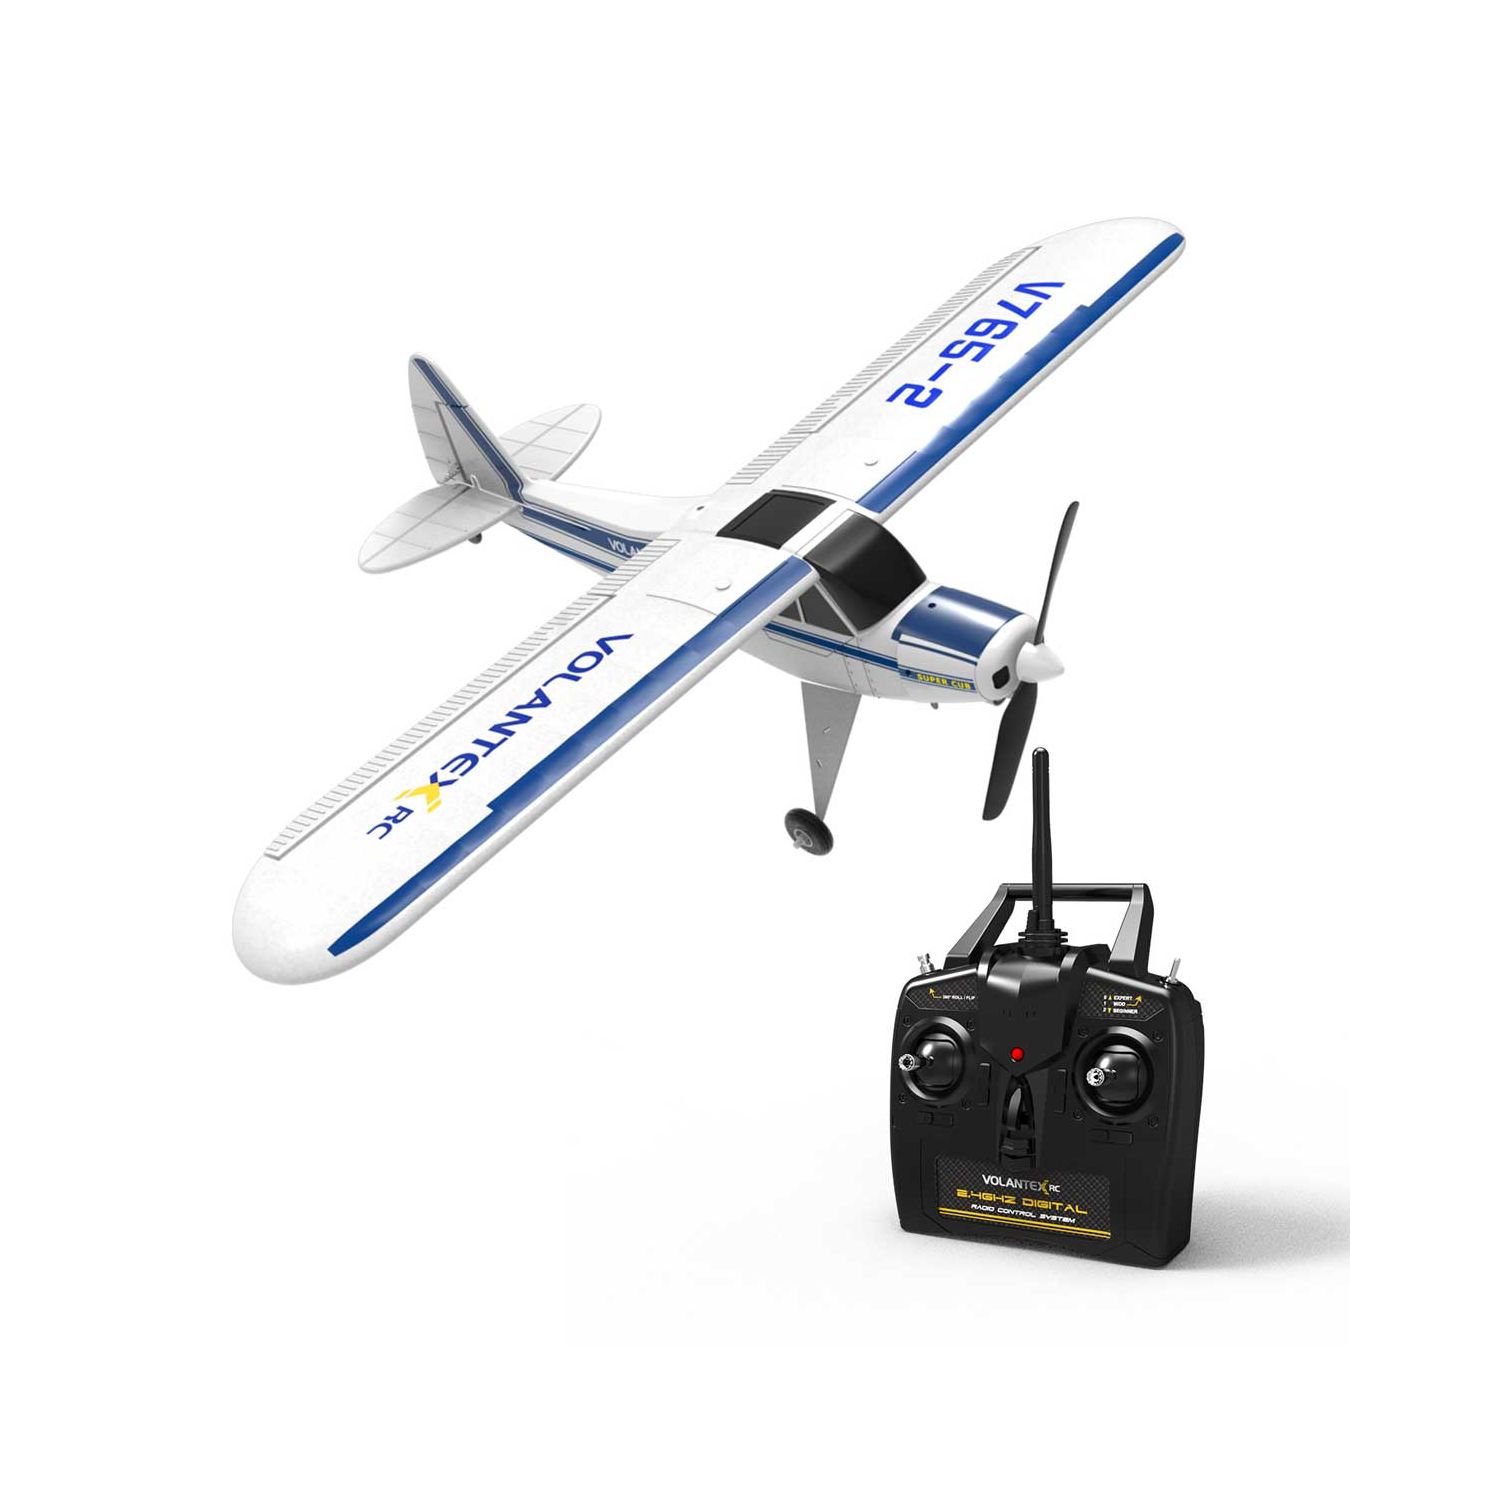 EX-Hobby Super Cub 750 Beginner Airplane with ABS Plastic Cowling and 6 Axis Gyro System (765-2) Ready-To-Fly